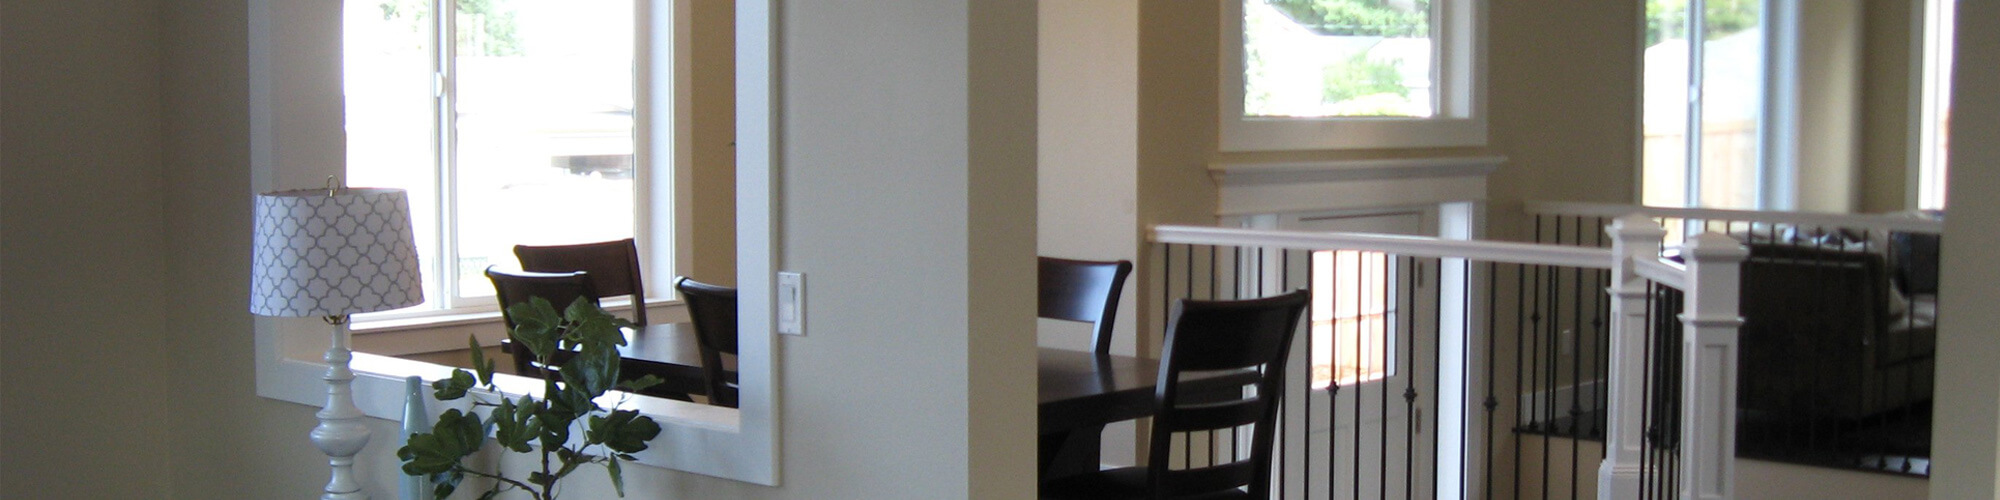 Painting Services in Lynnwood, WA